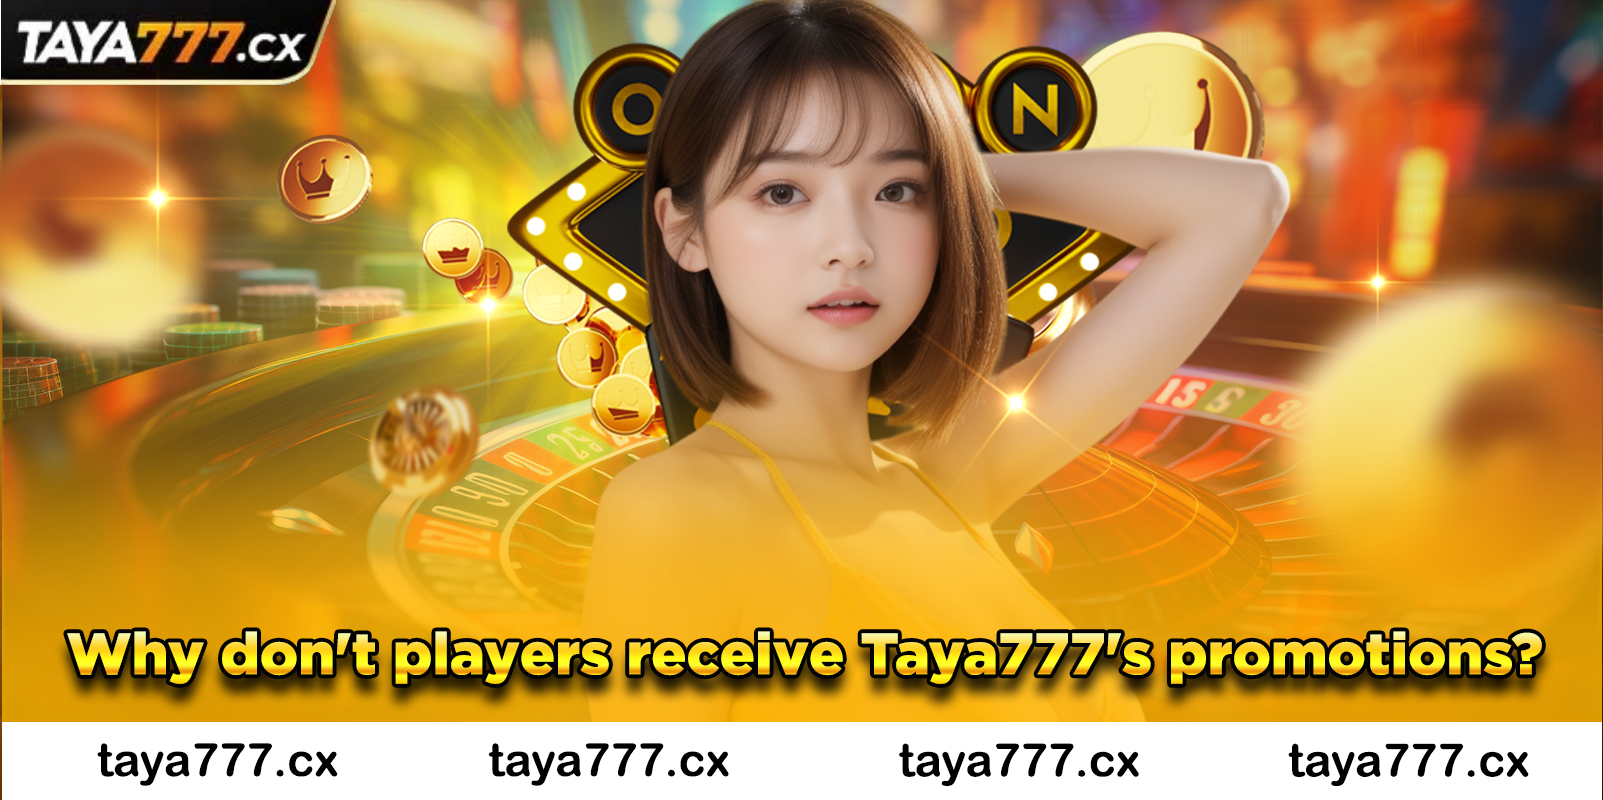 Why don't players receive Taya777's promotions?